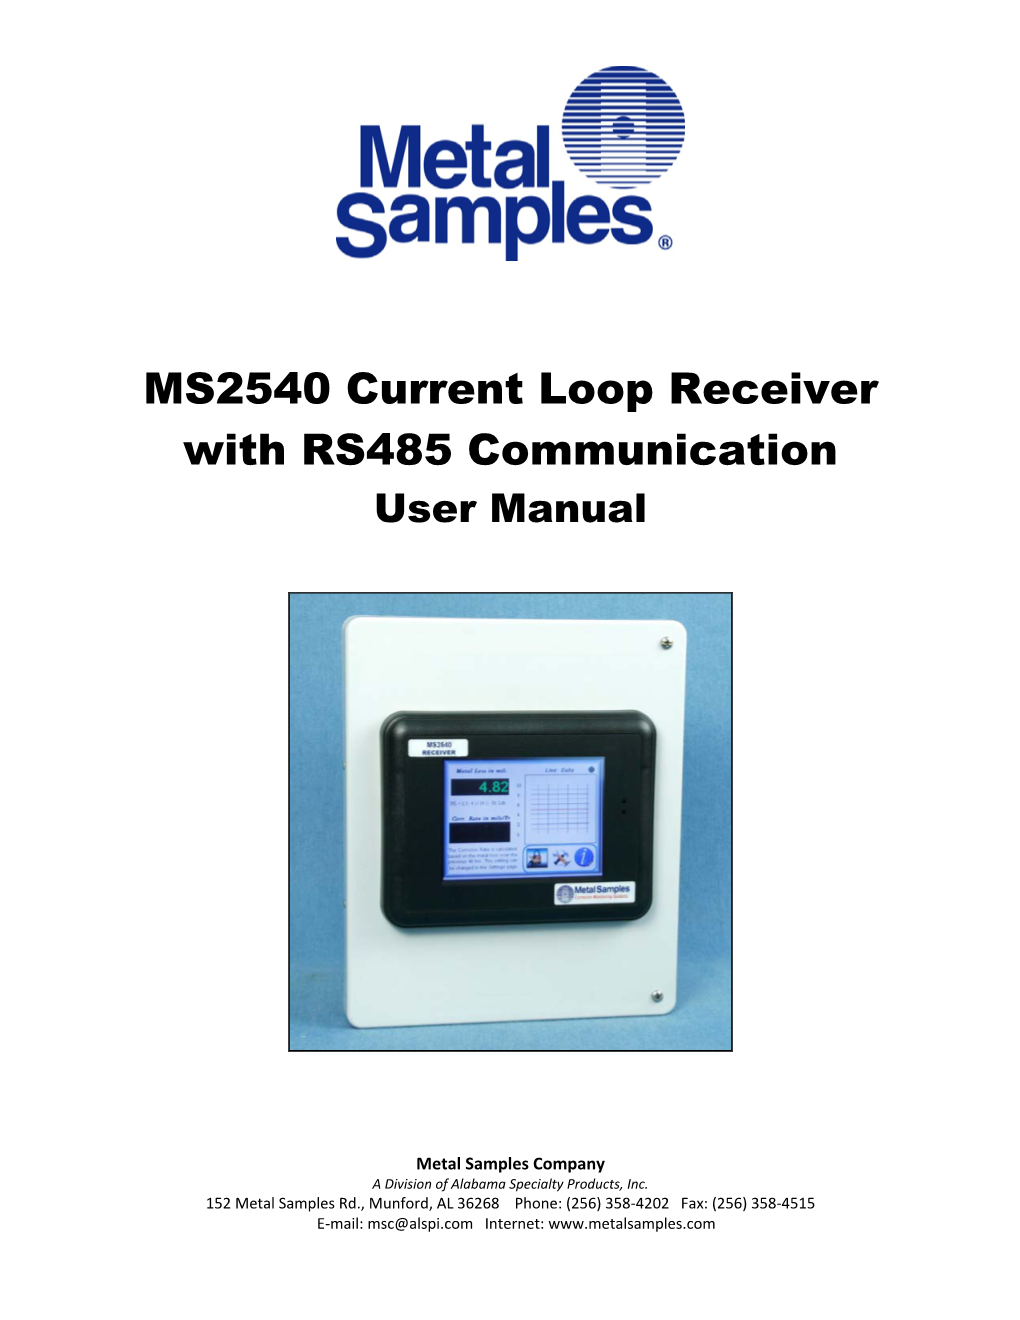 MS2540 Current Loop Receiver with RS485 Communication User Manual